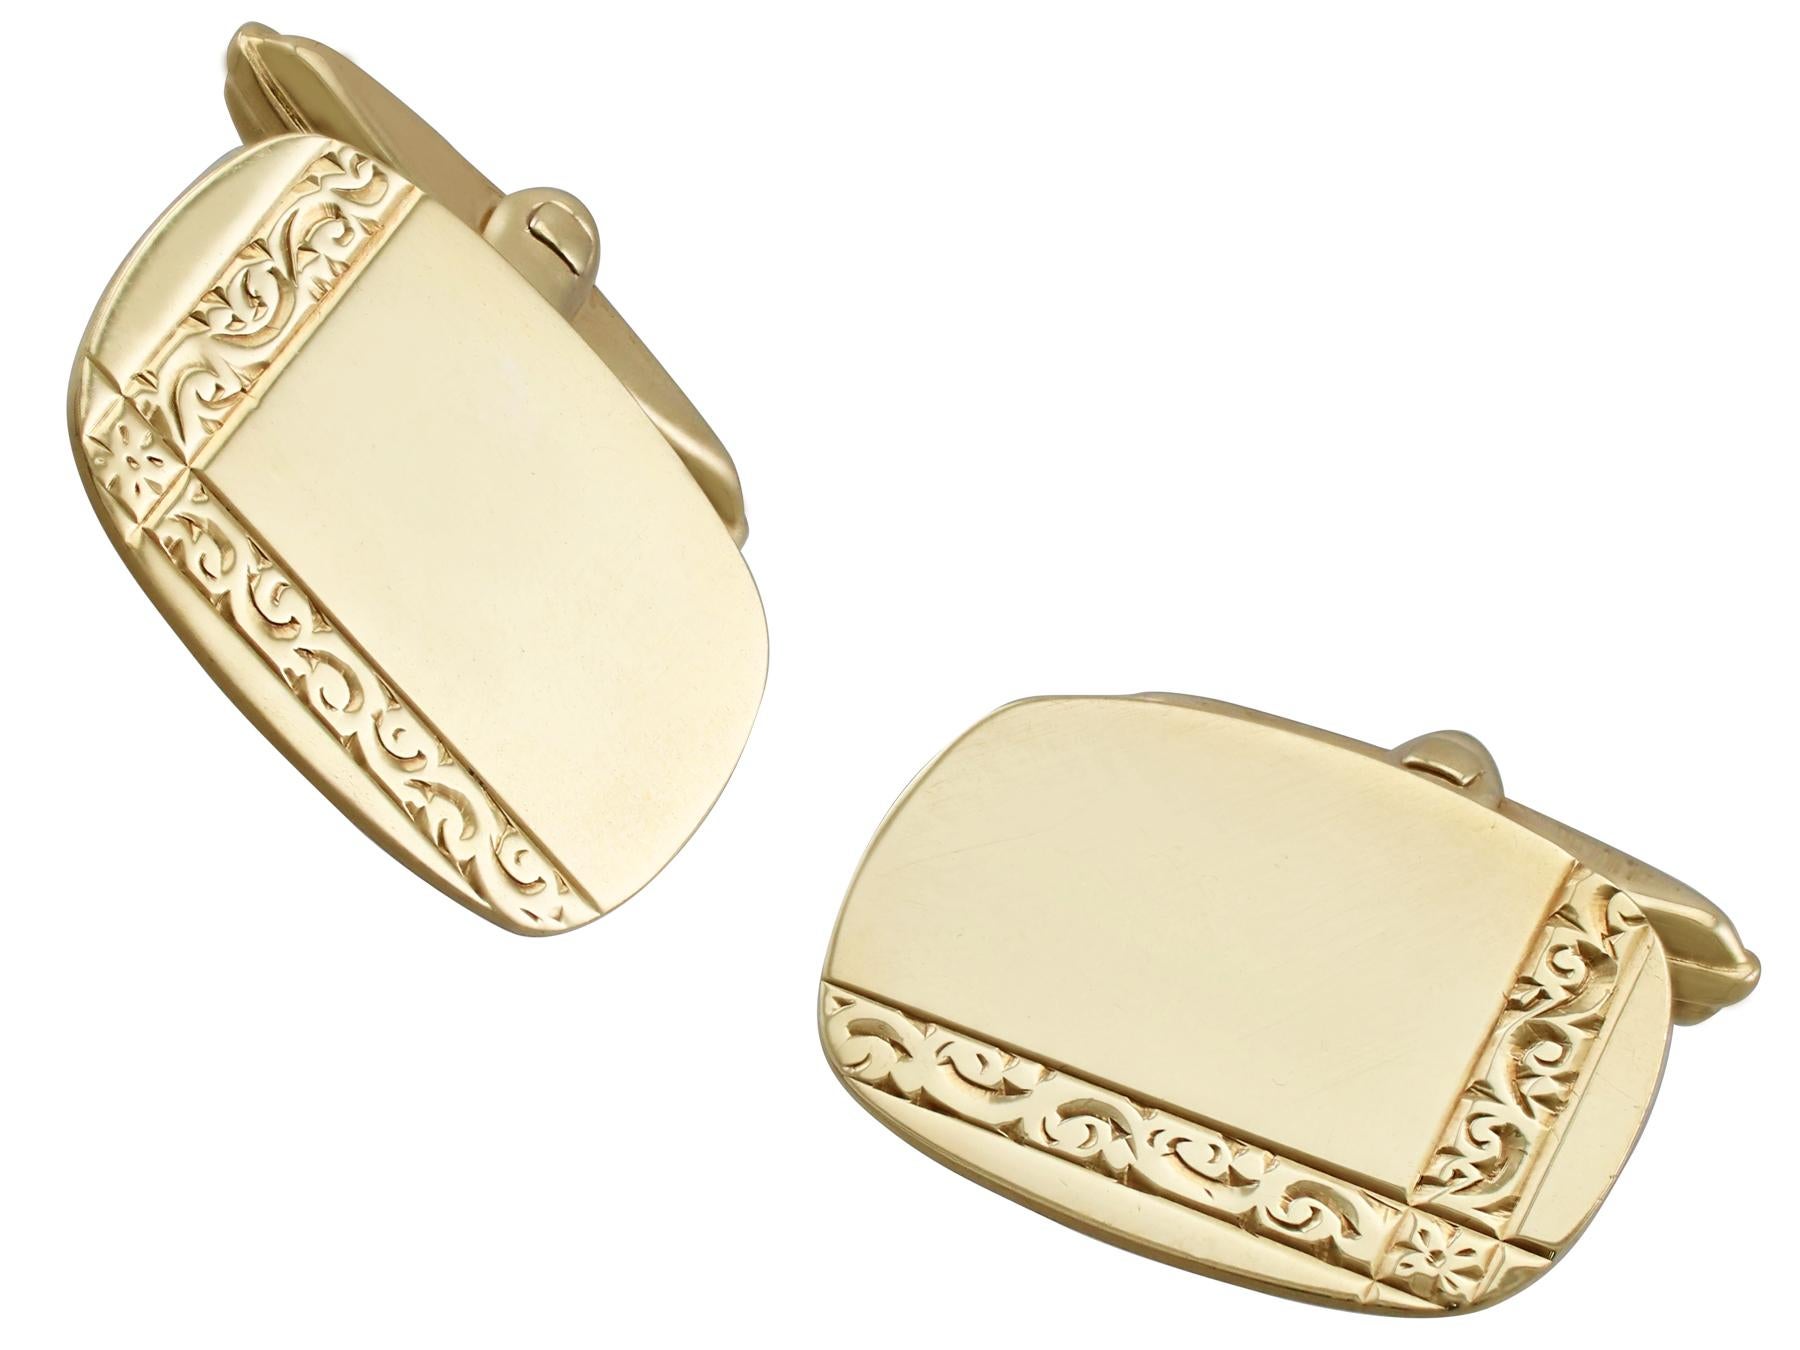 A fine, impressive pair of large rectangular vintage English 9 karat yellow gold cufflinks; an addition to our men's jewelry and estate jewelry collections.

These English cufflinks have been crafted in 9k yellow gold.

The cufflinks have a